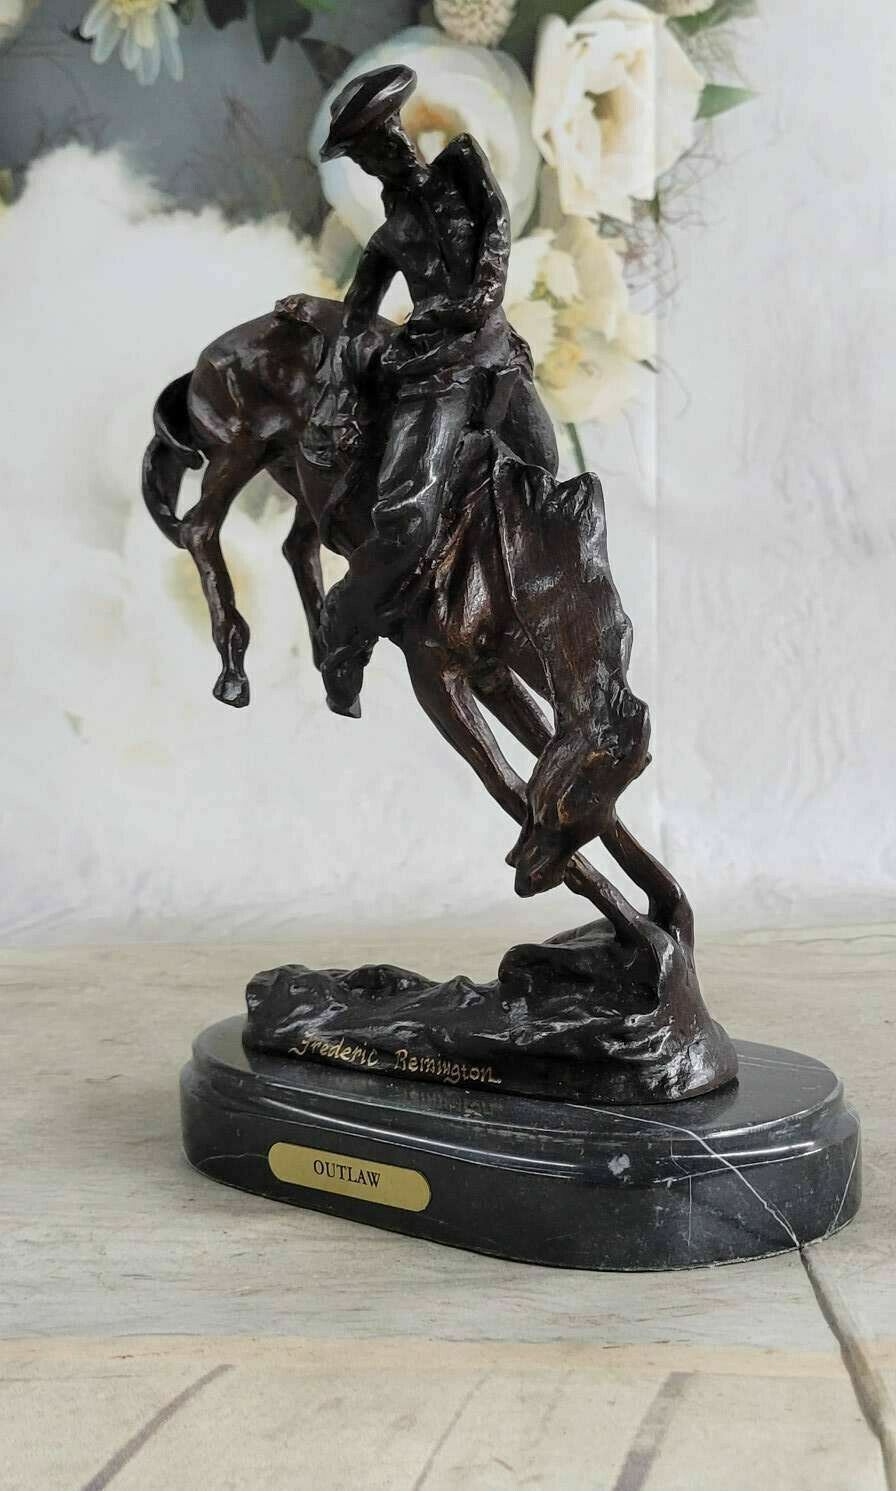 Western Old West Cowboy and Faithful Horse Bronze Sculpture by Remington Figure